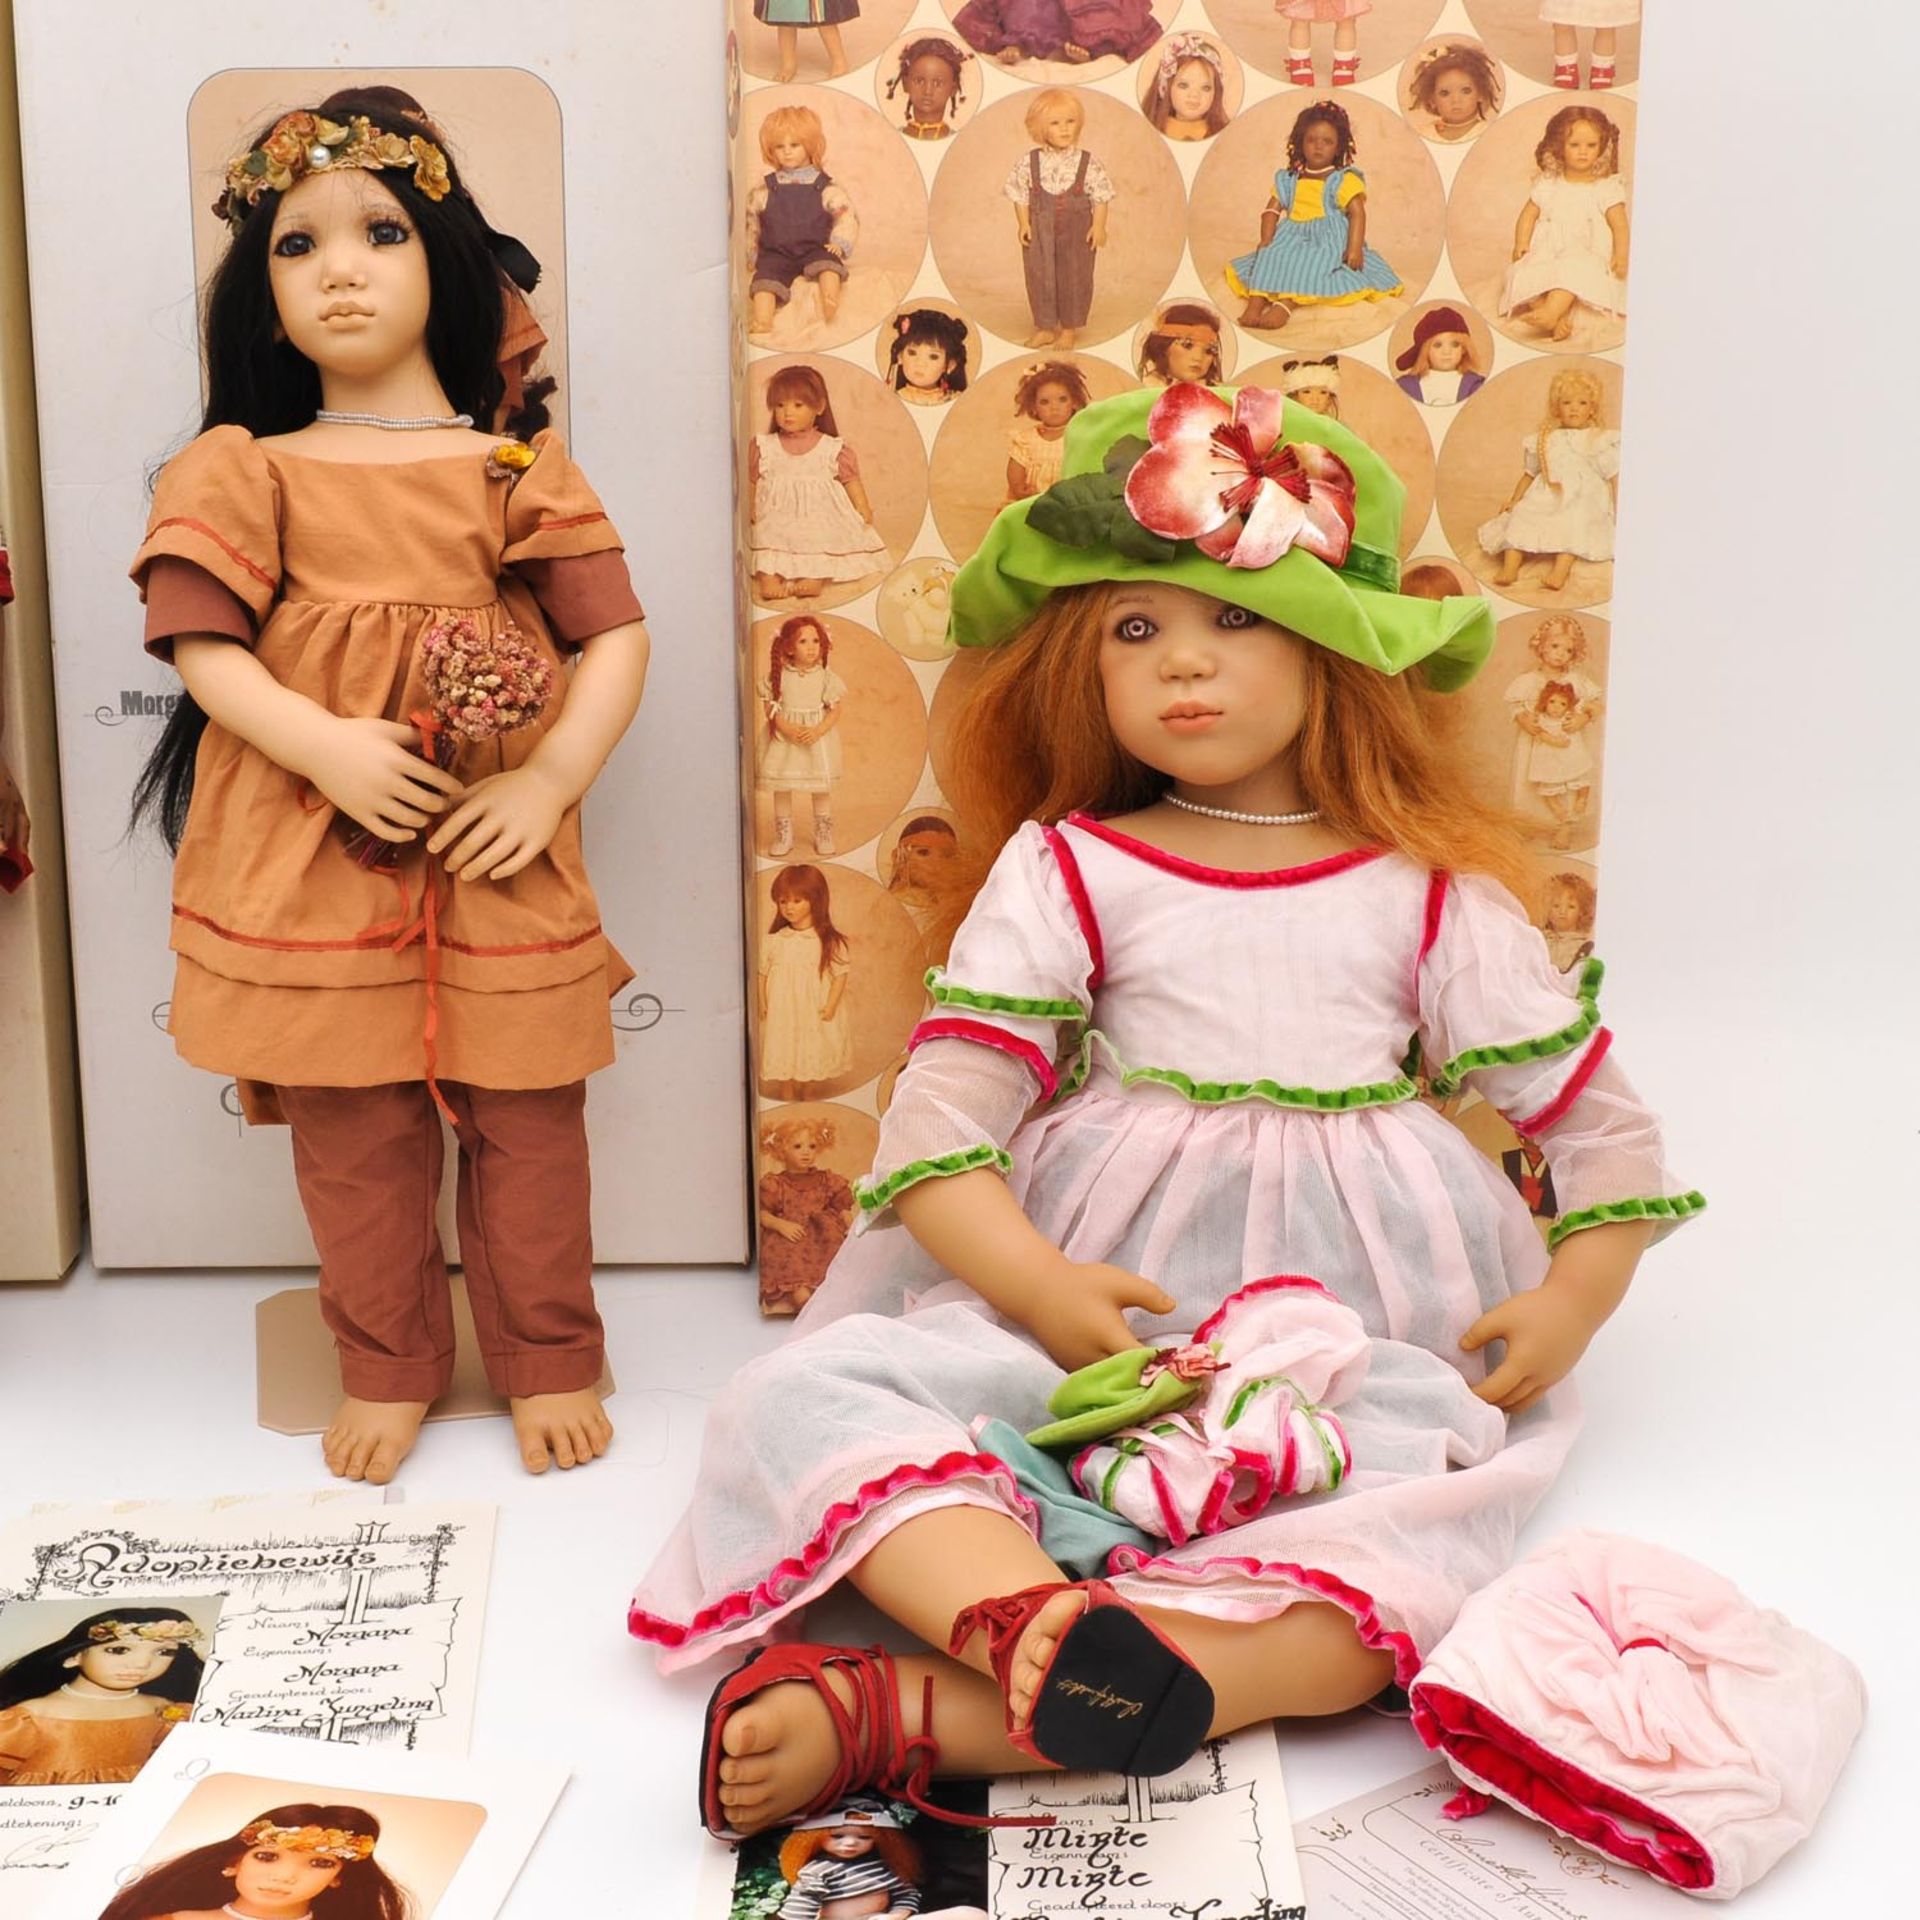 A Collection of 4 Annette Himstedt Dolls - Image 2 of 5